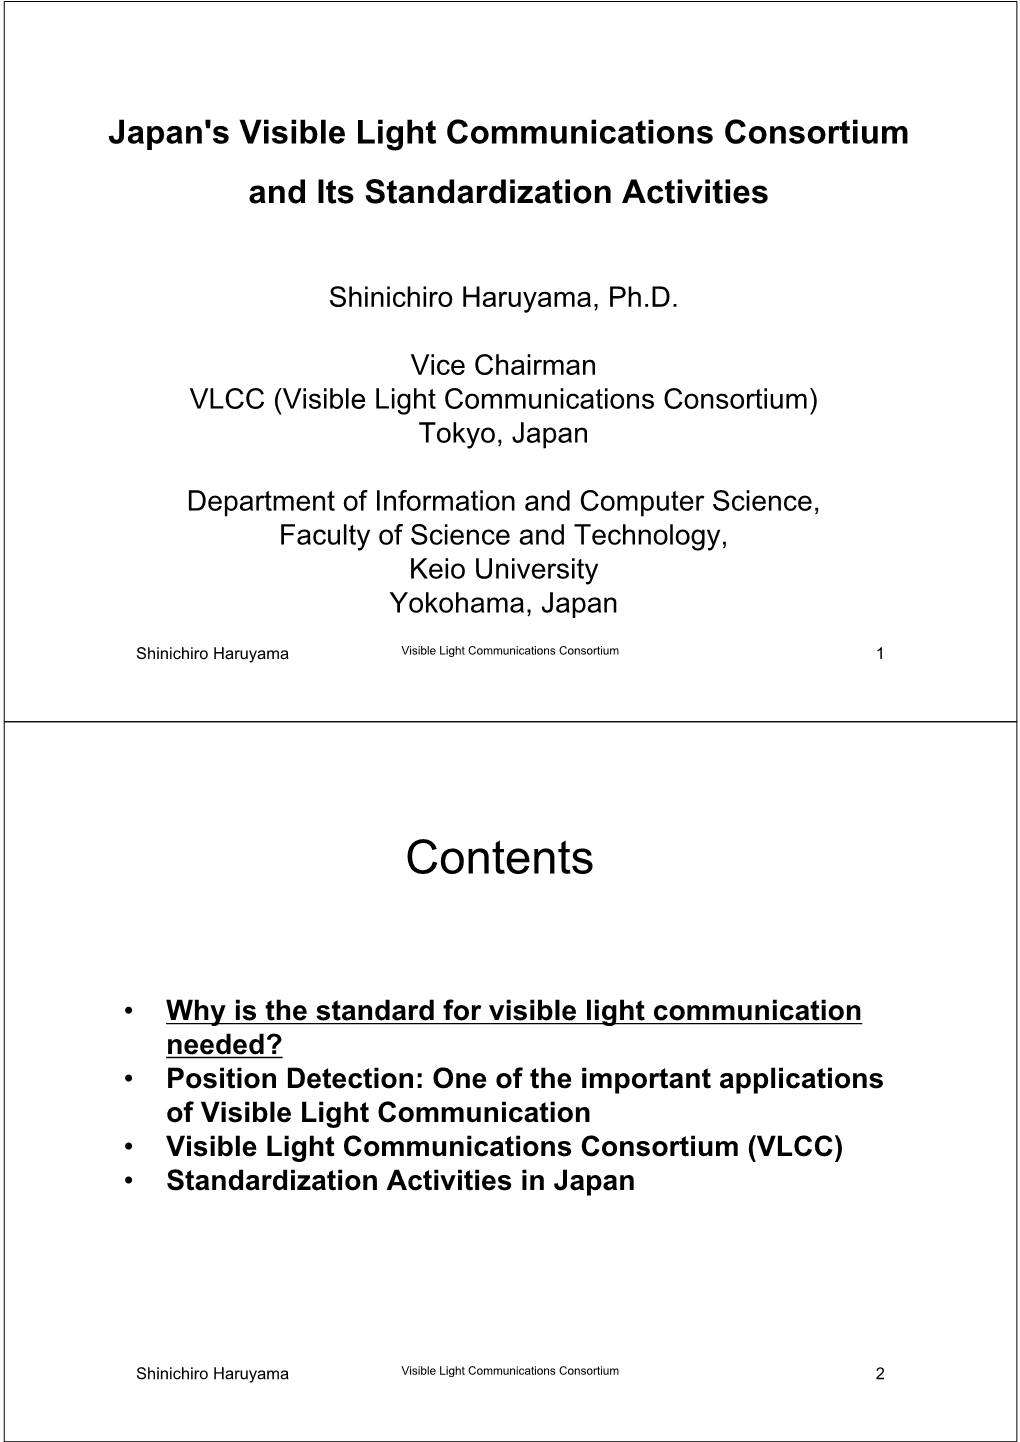 Japan's Visible Light Communications Consortium and Its Standardization Activities